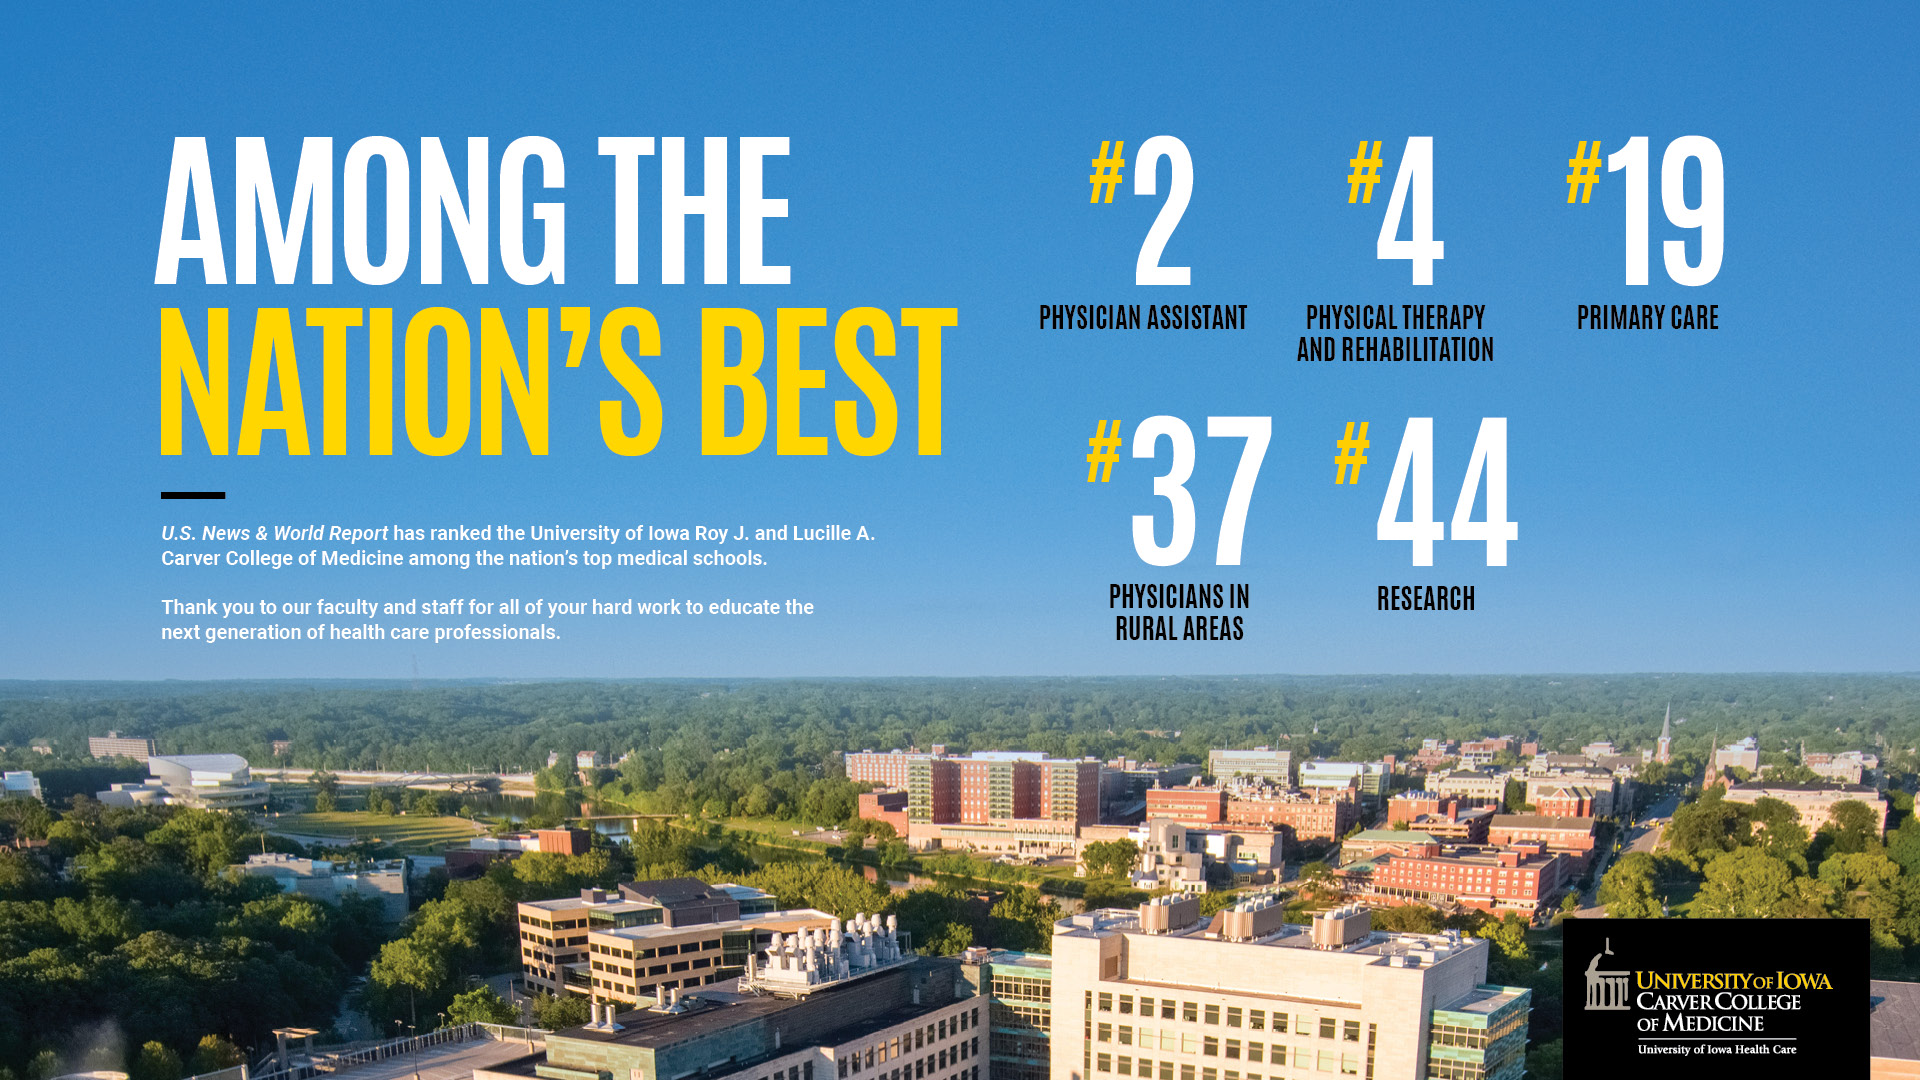 The University of Iowa Carver College of Medicine was ranked by U.S. News & World Report as #2 in Physician Assistant, #4 in Physical Therapy, #19 in Primary Care, #37 in Physicians in Rural Areas, and #44 in Research.